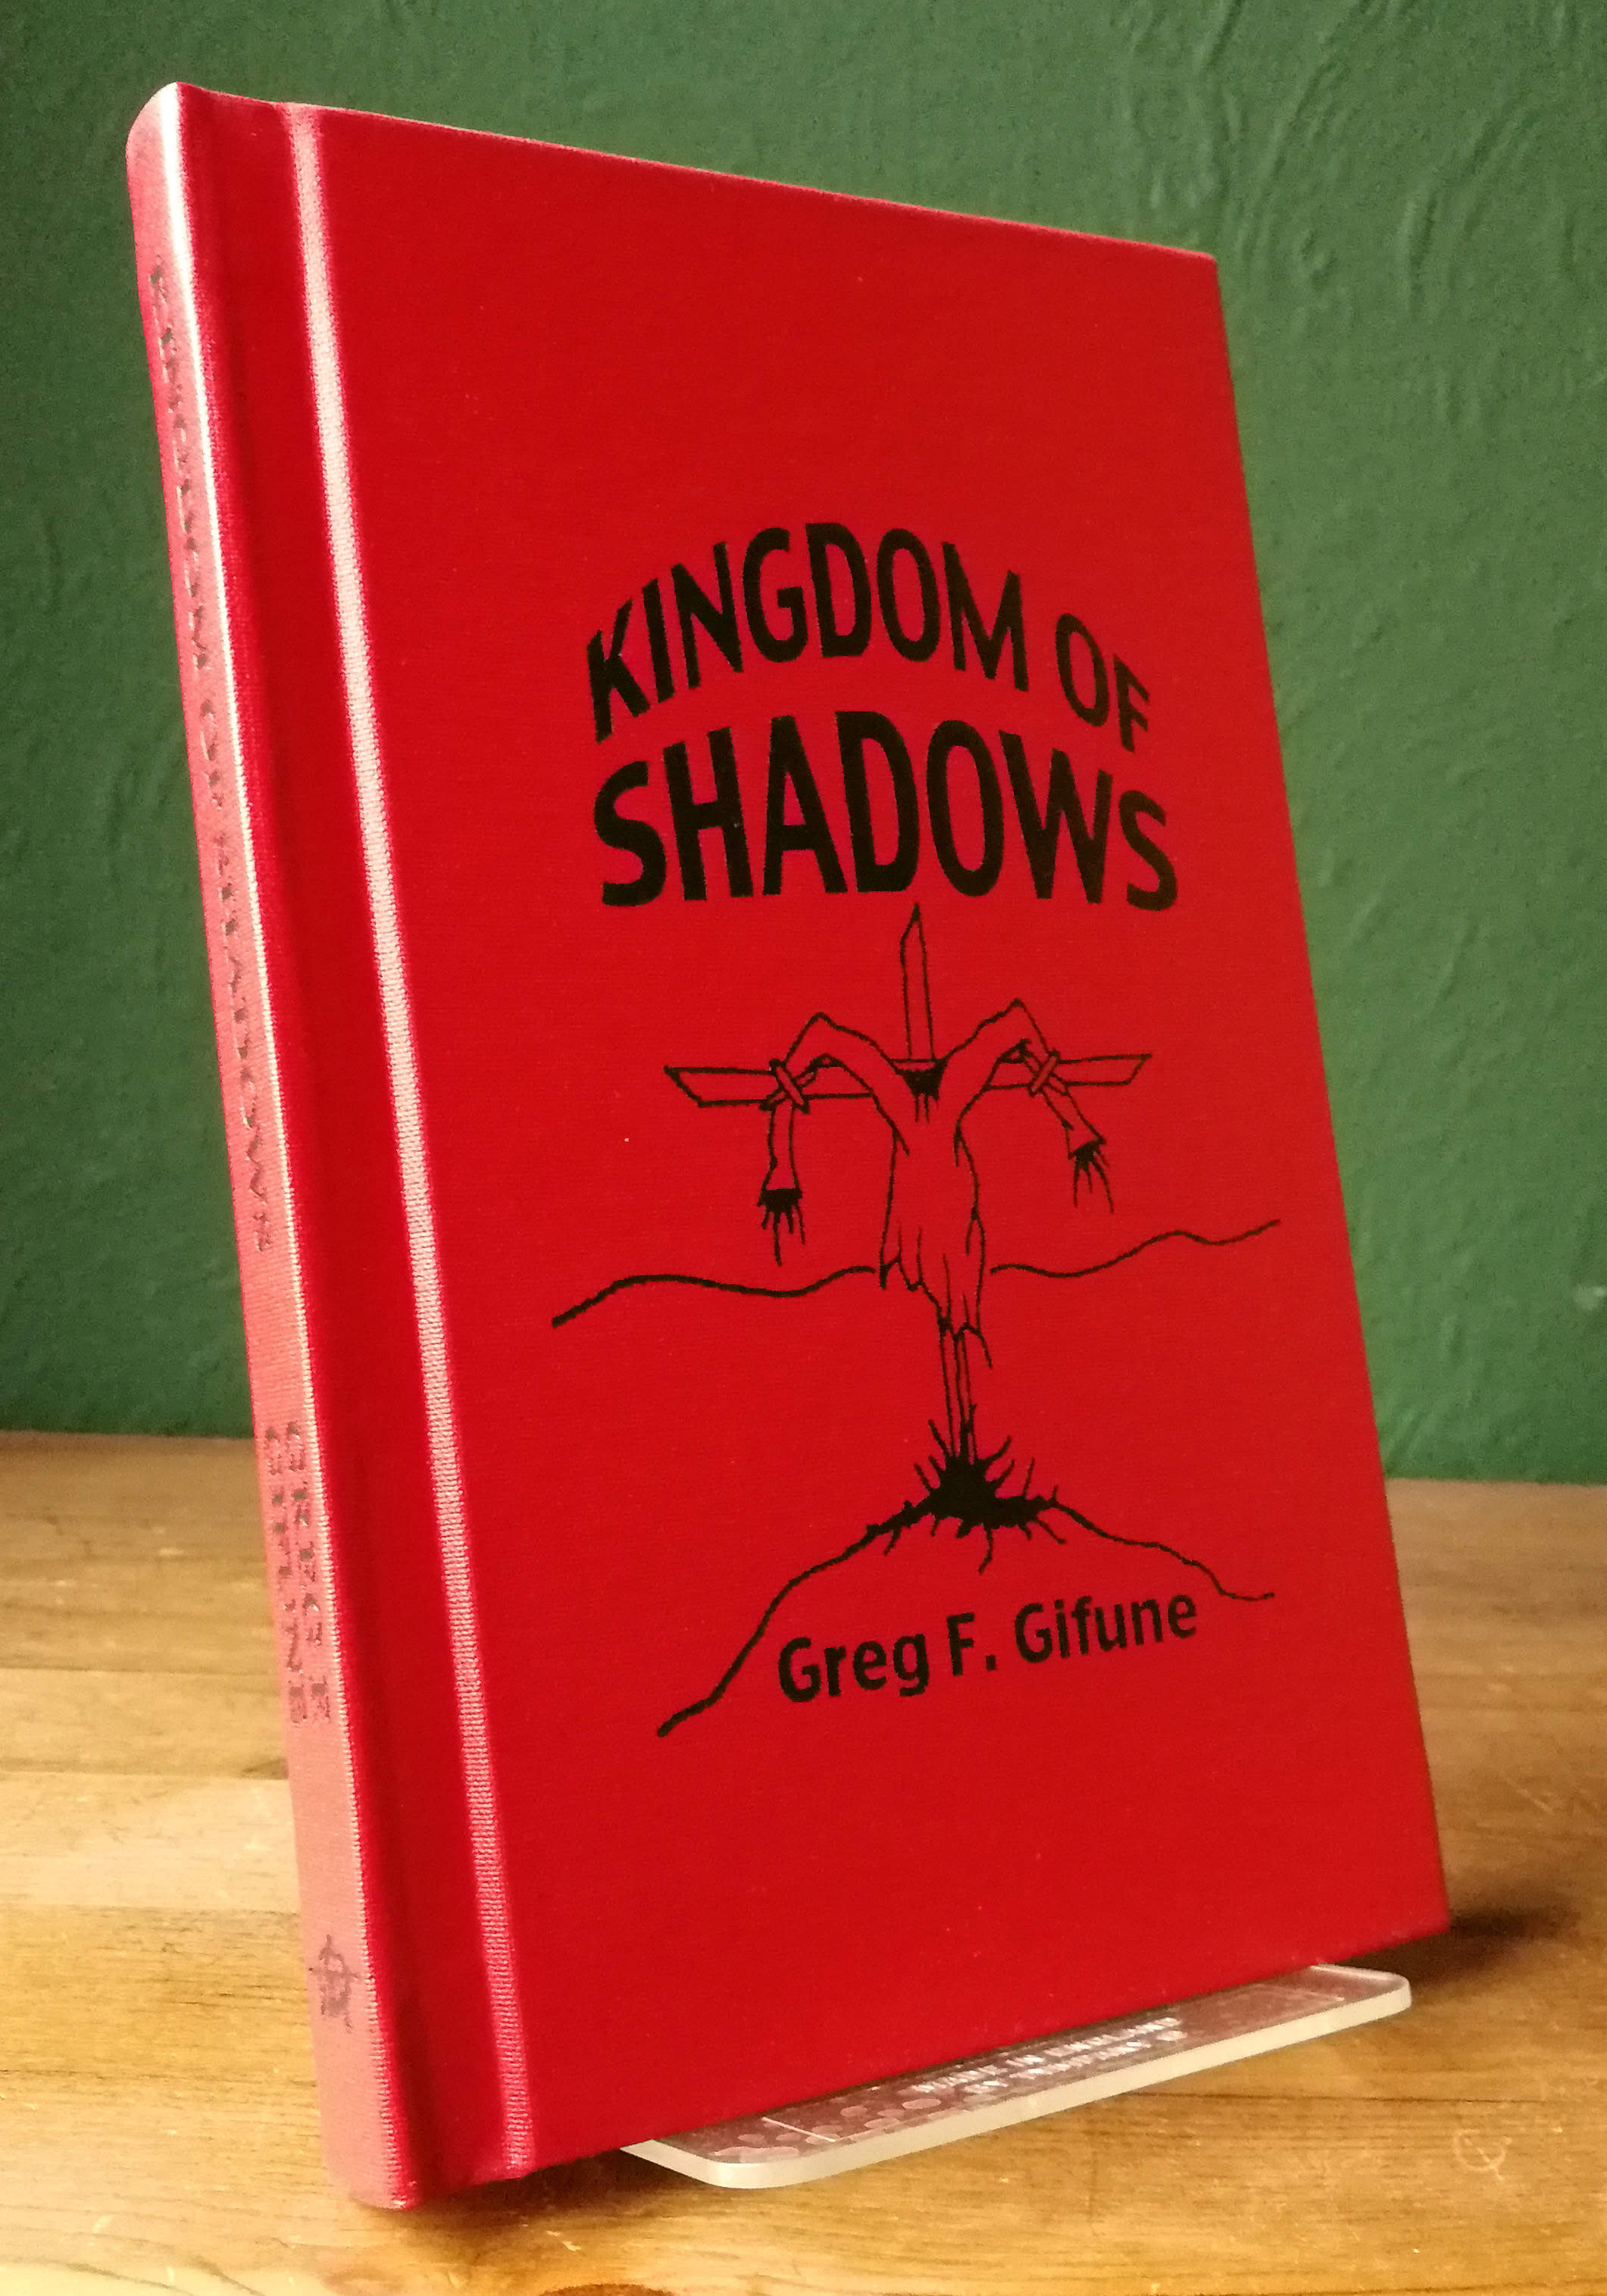 Kingdom Of Shadows Signed Limited Edition